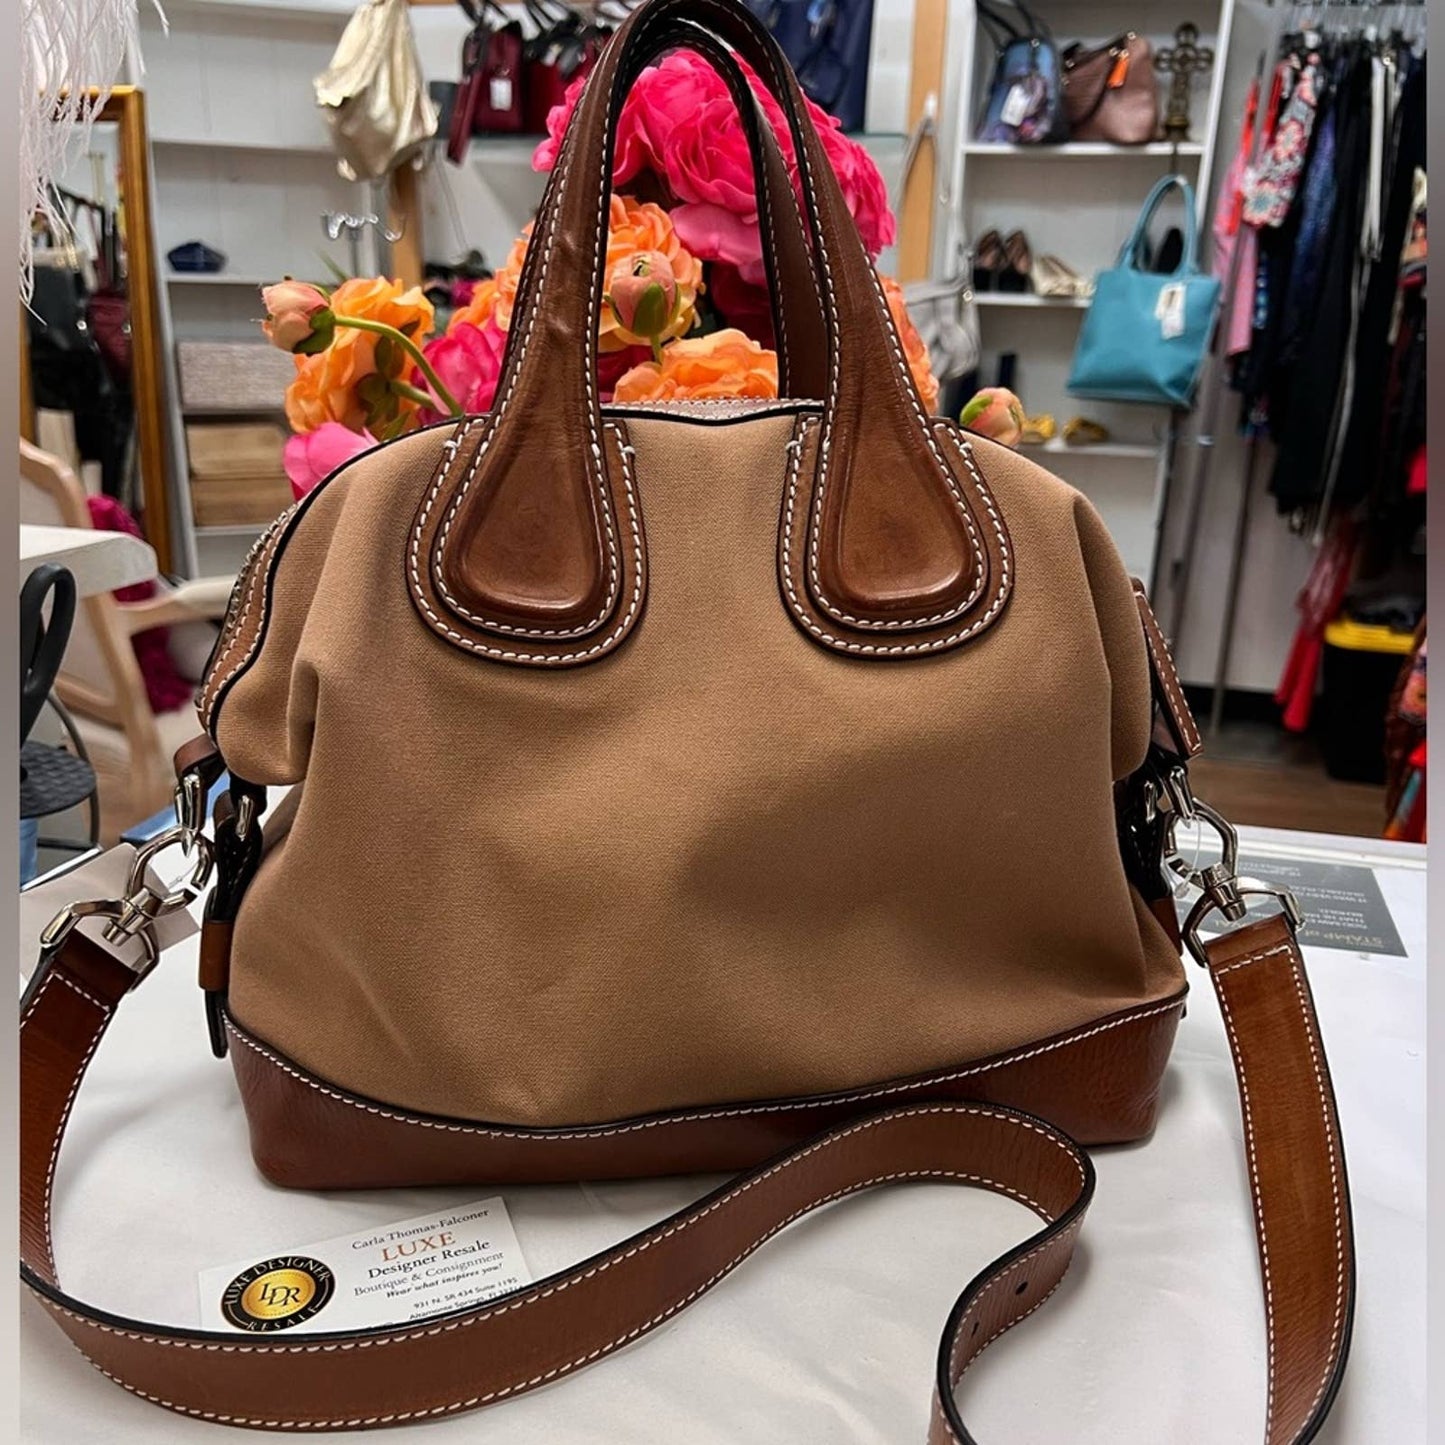 GIVENCHY Nightingale Brown Canvas & Leather Bag